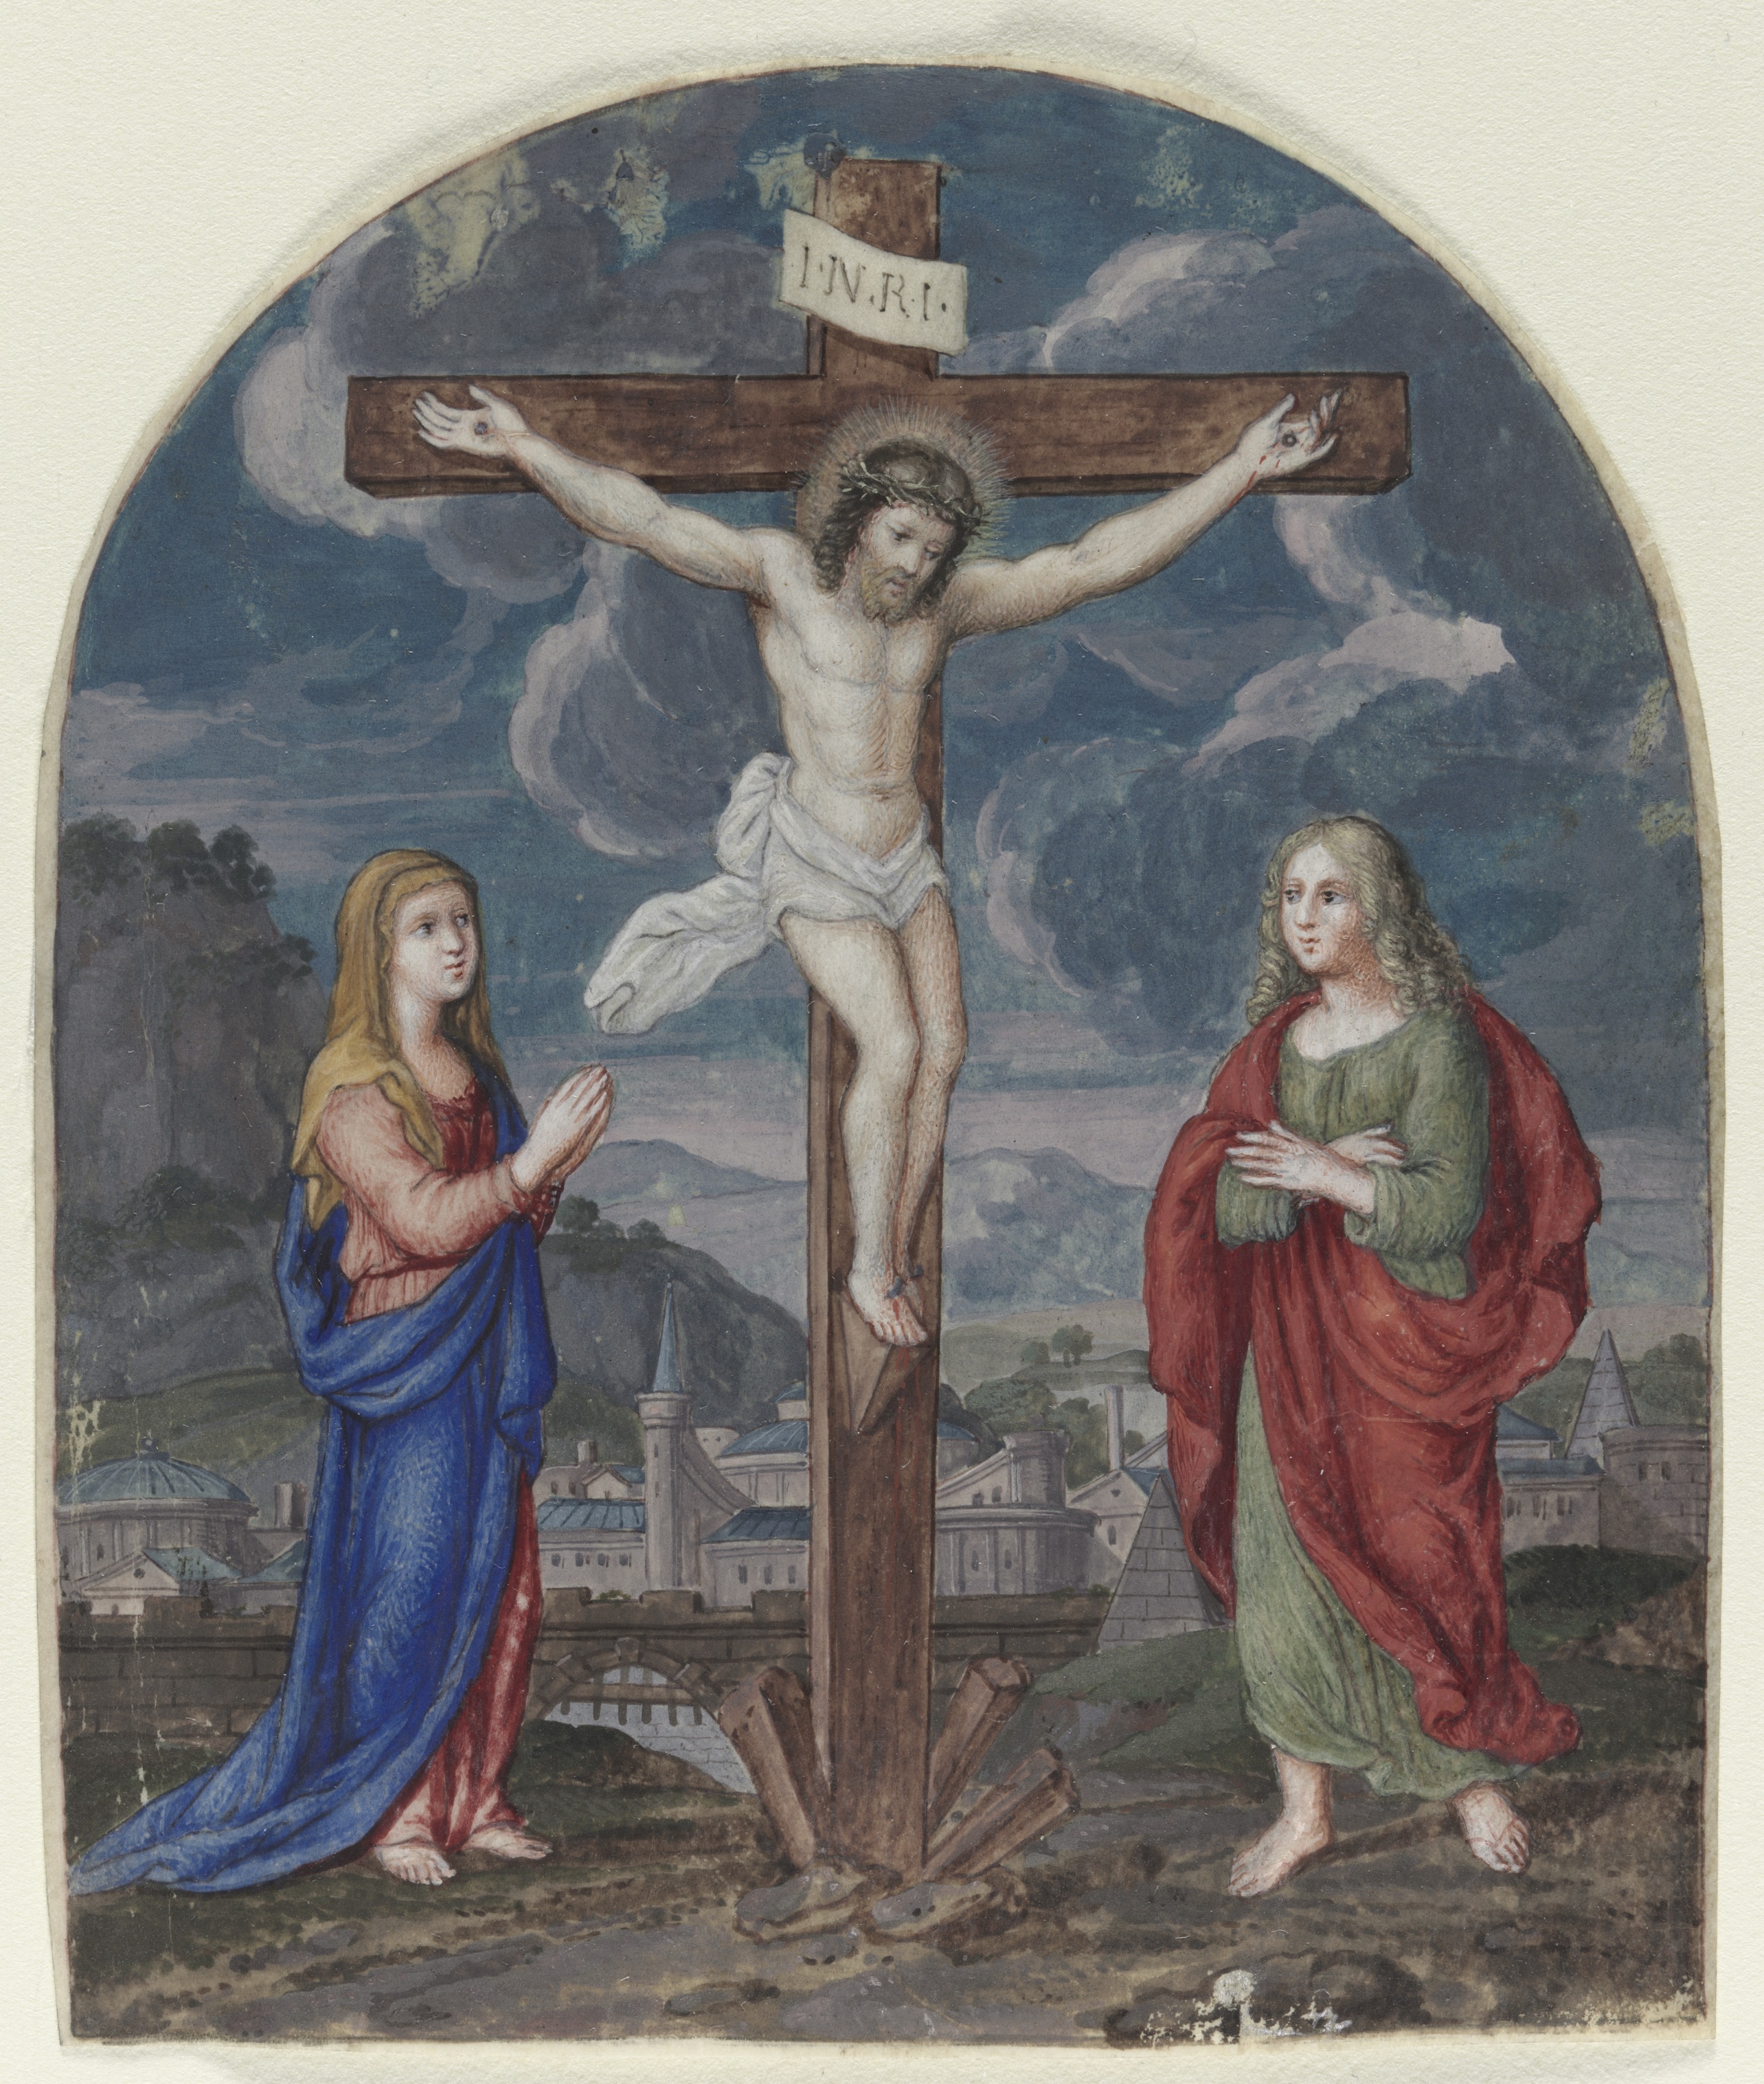 The Crucifixion: Miniature Excised from a Prayer Book